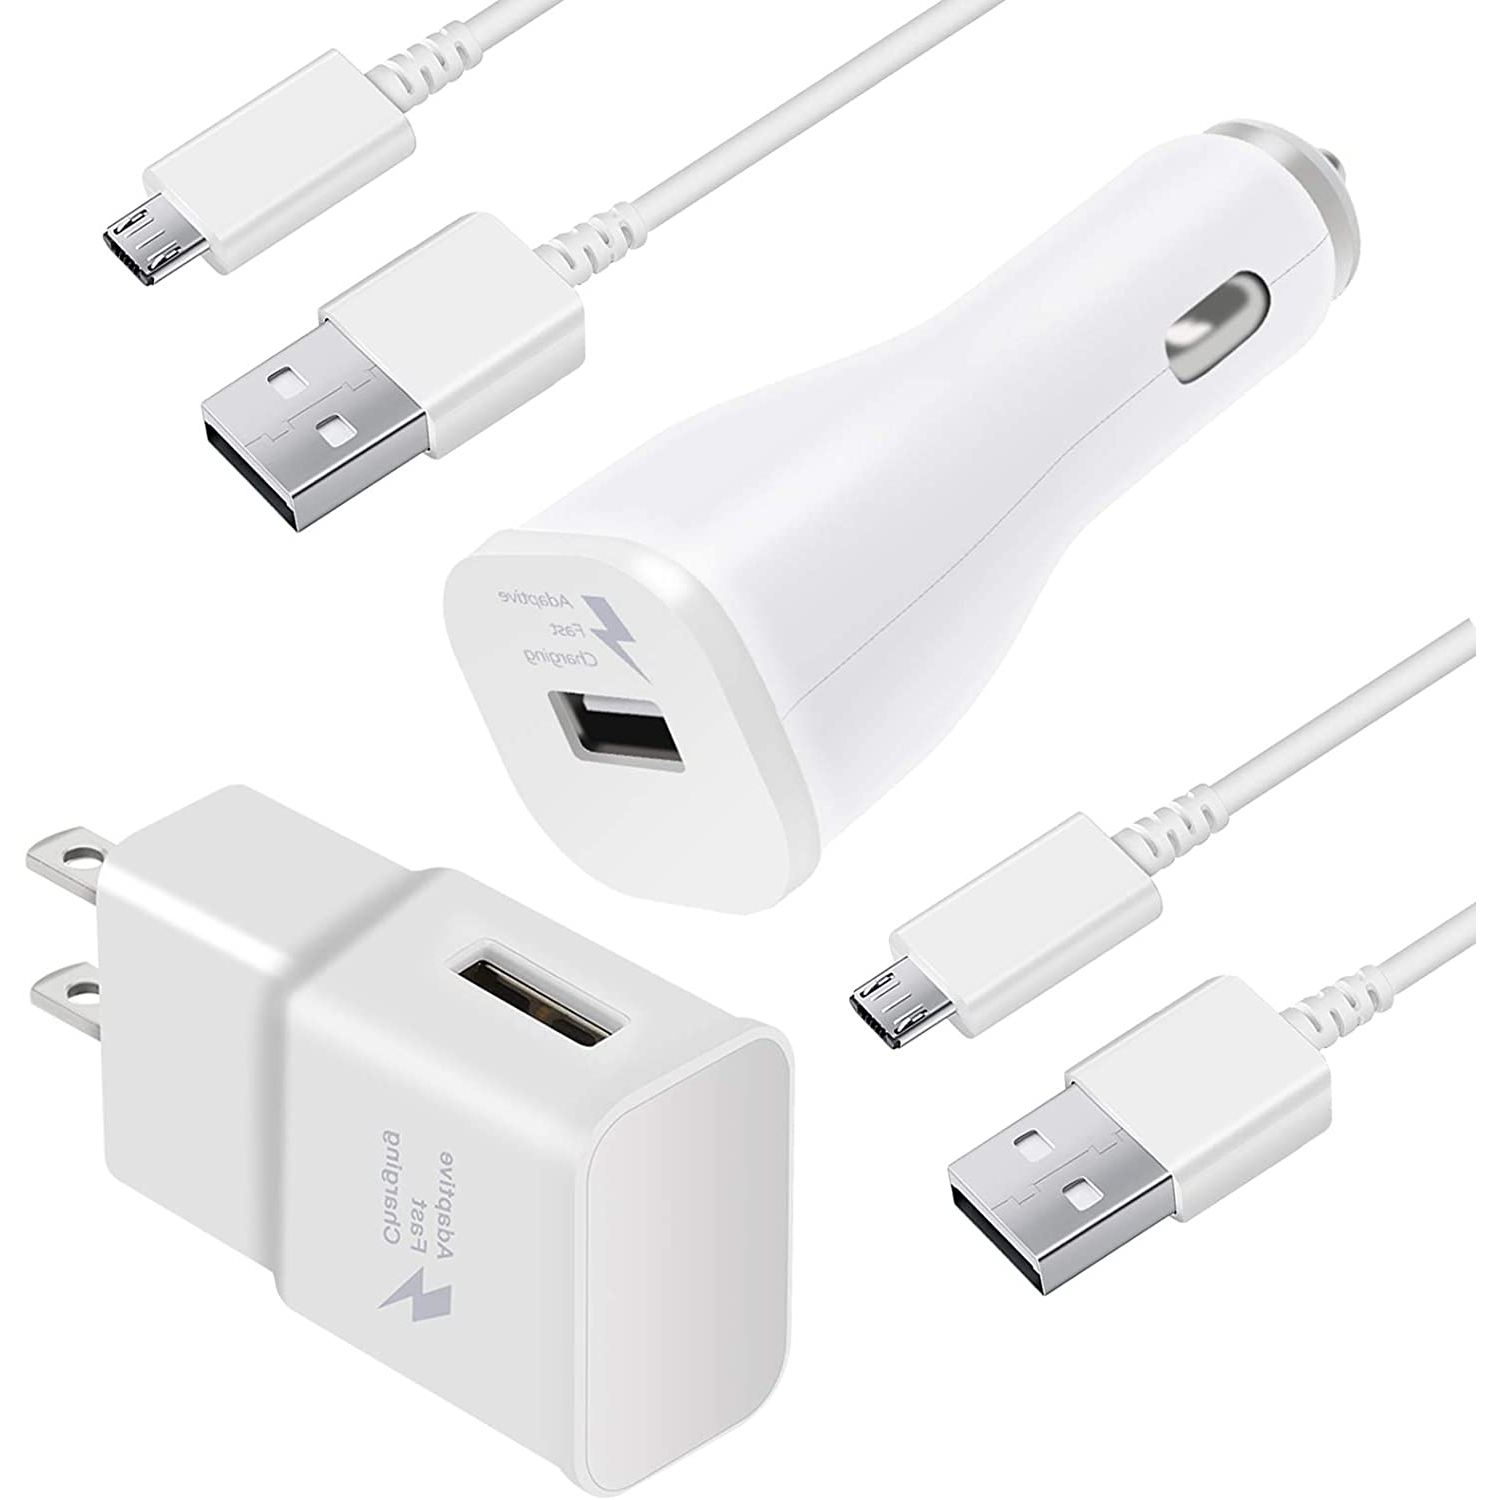 Adaptive Fast Charger Kit- Fast Car Charger Android, Fast Charging Micro USB Cable for Samsung Galaxy S7/Edge/S6/Note5/4/3/S3 J8 J7 J6 J5 J4 J3, Moto E4 E5, LG K10 K20 K